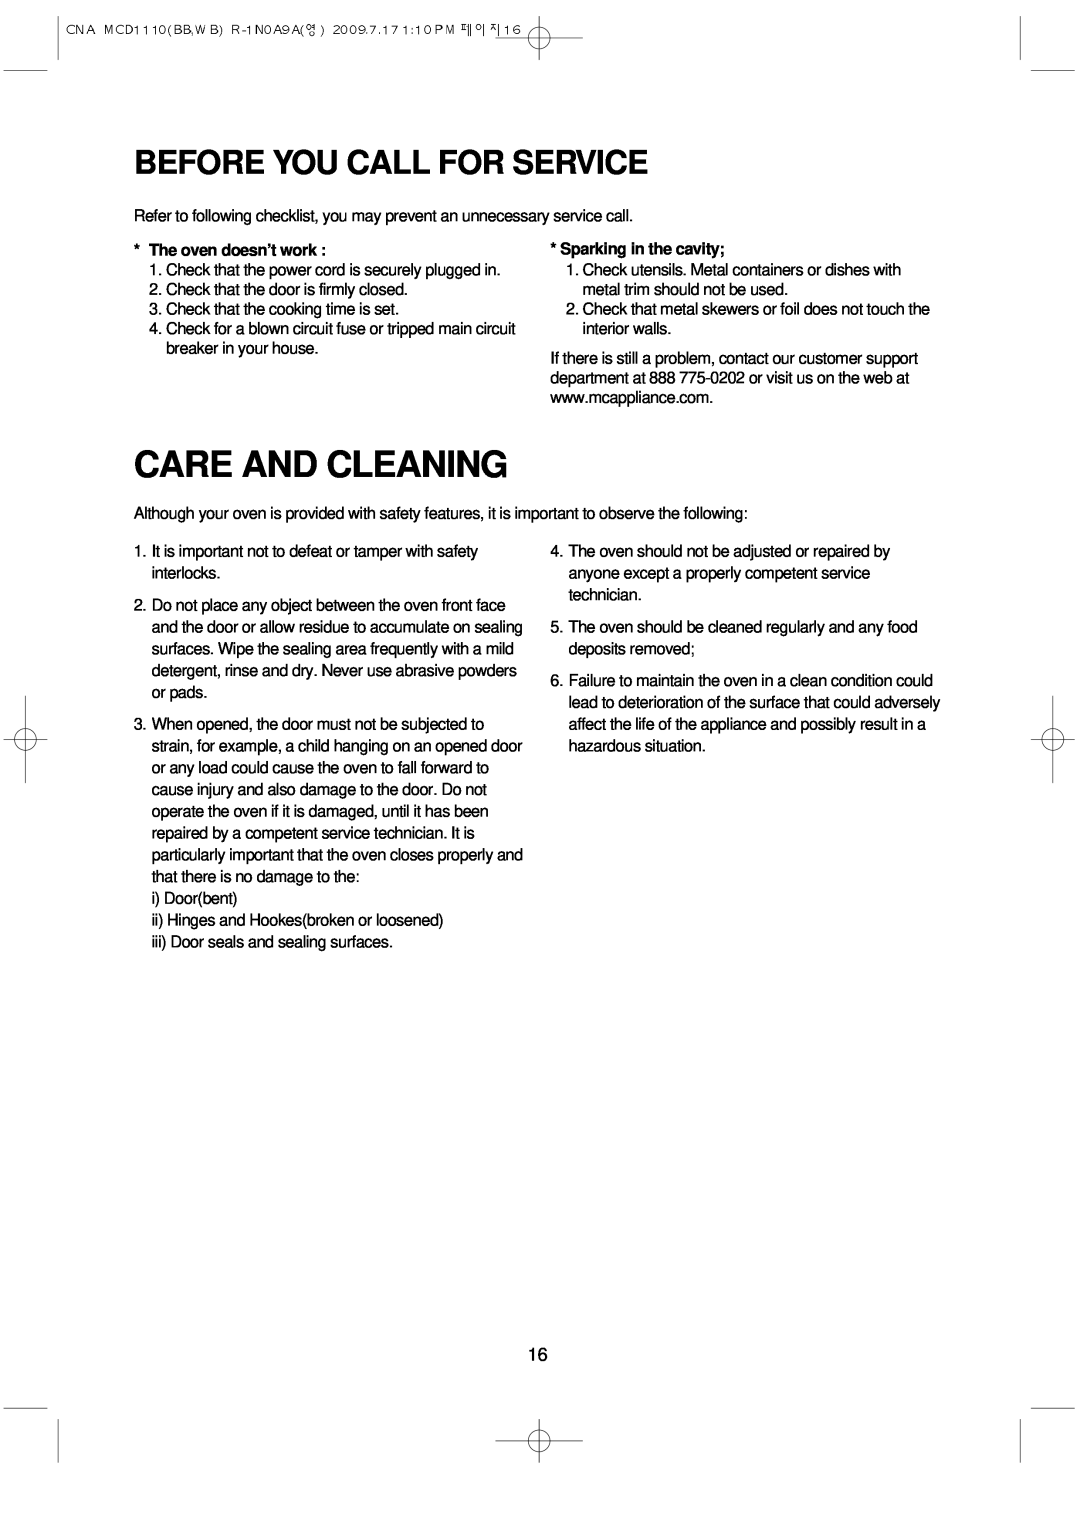 Magic Chef MCD1110WB manual Before You Call For Service, Care And Cleaning 